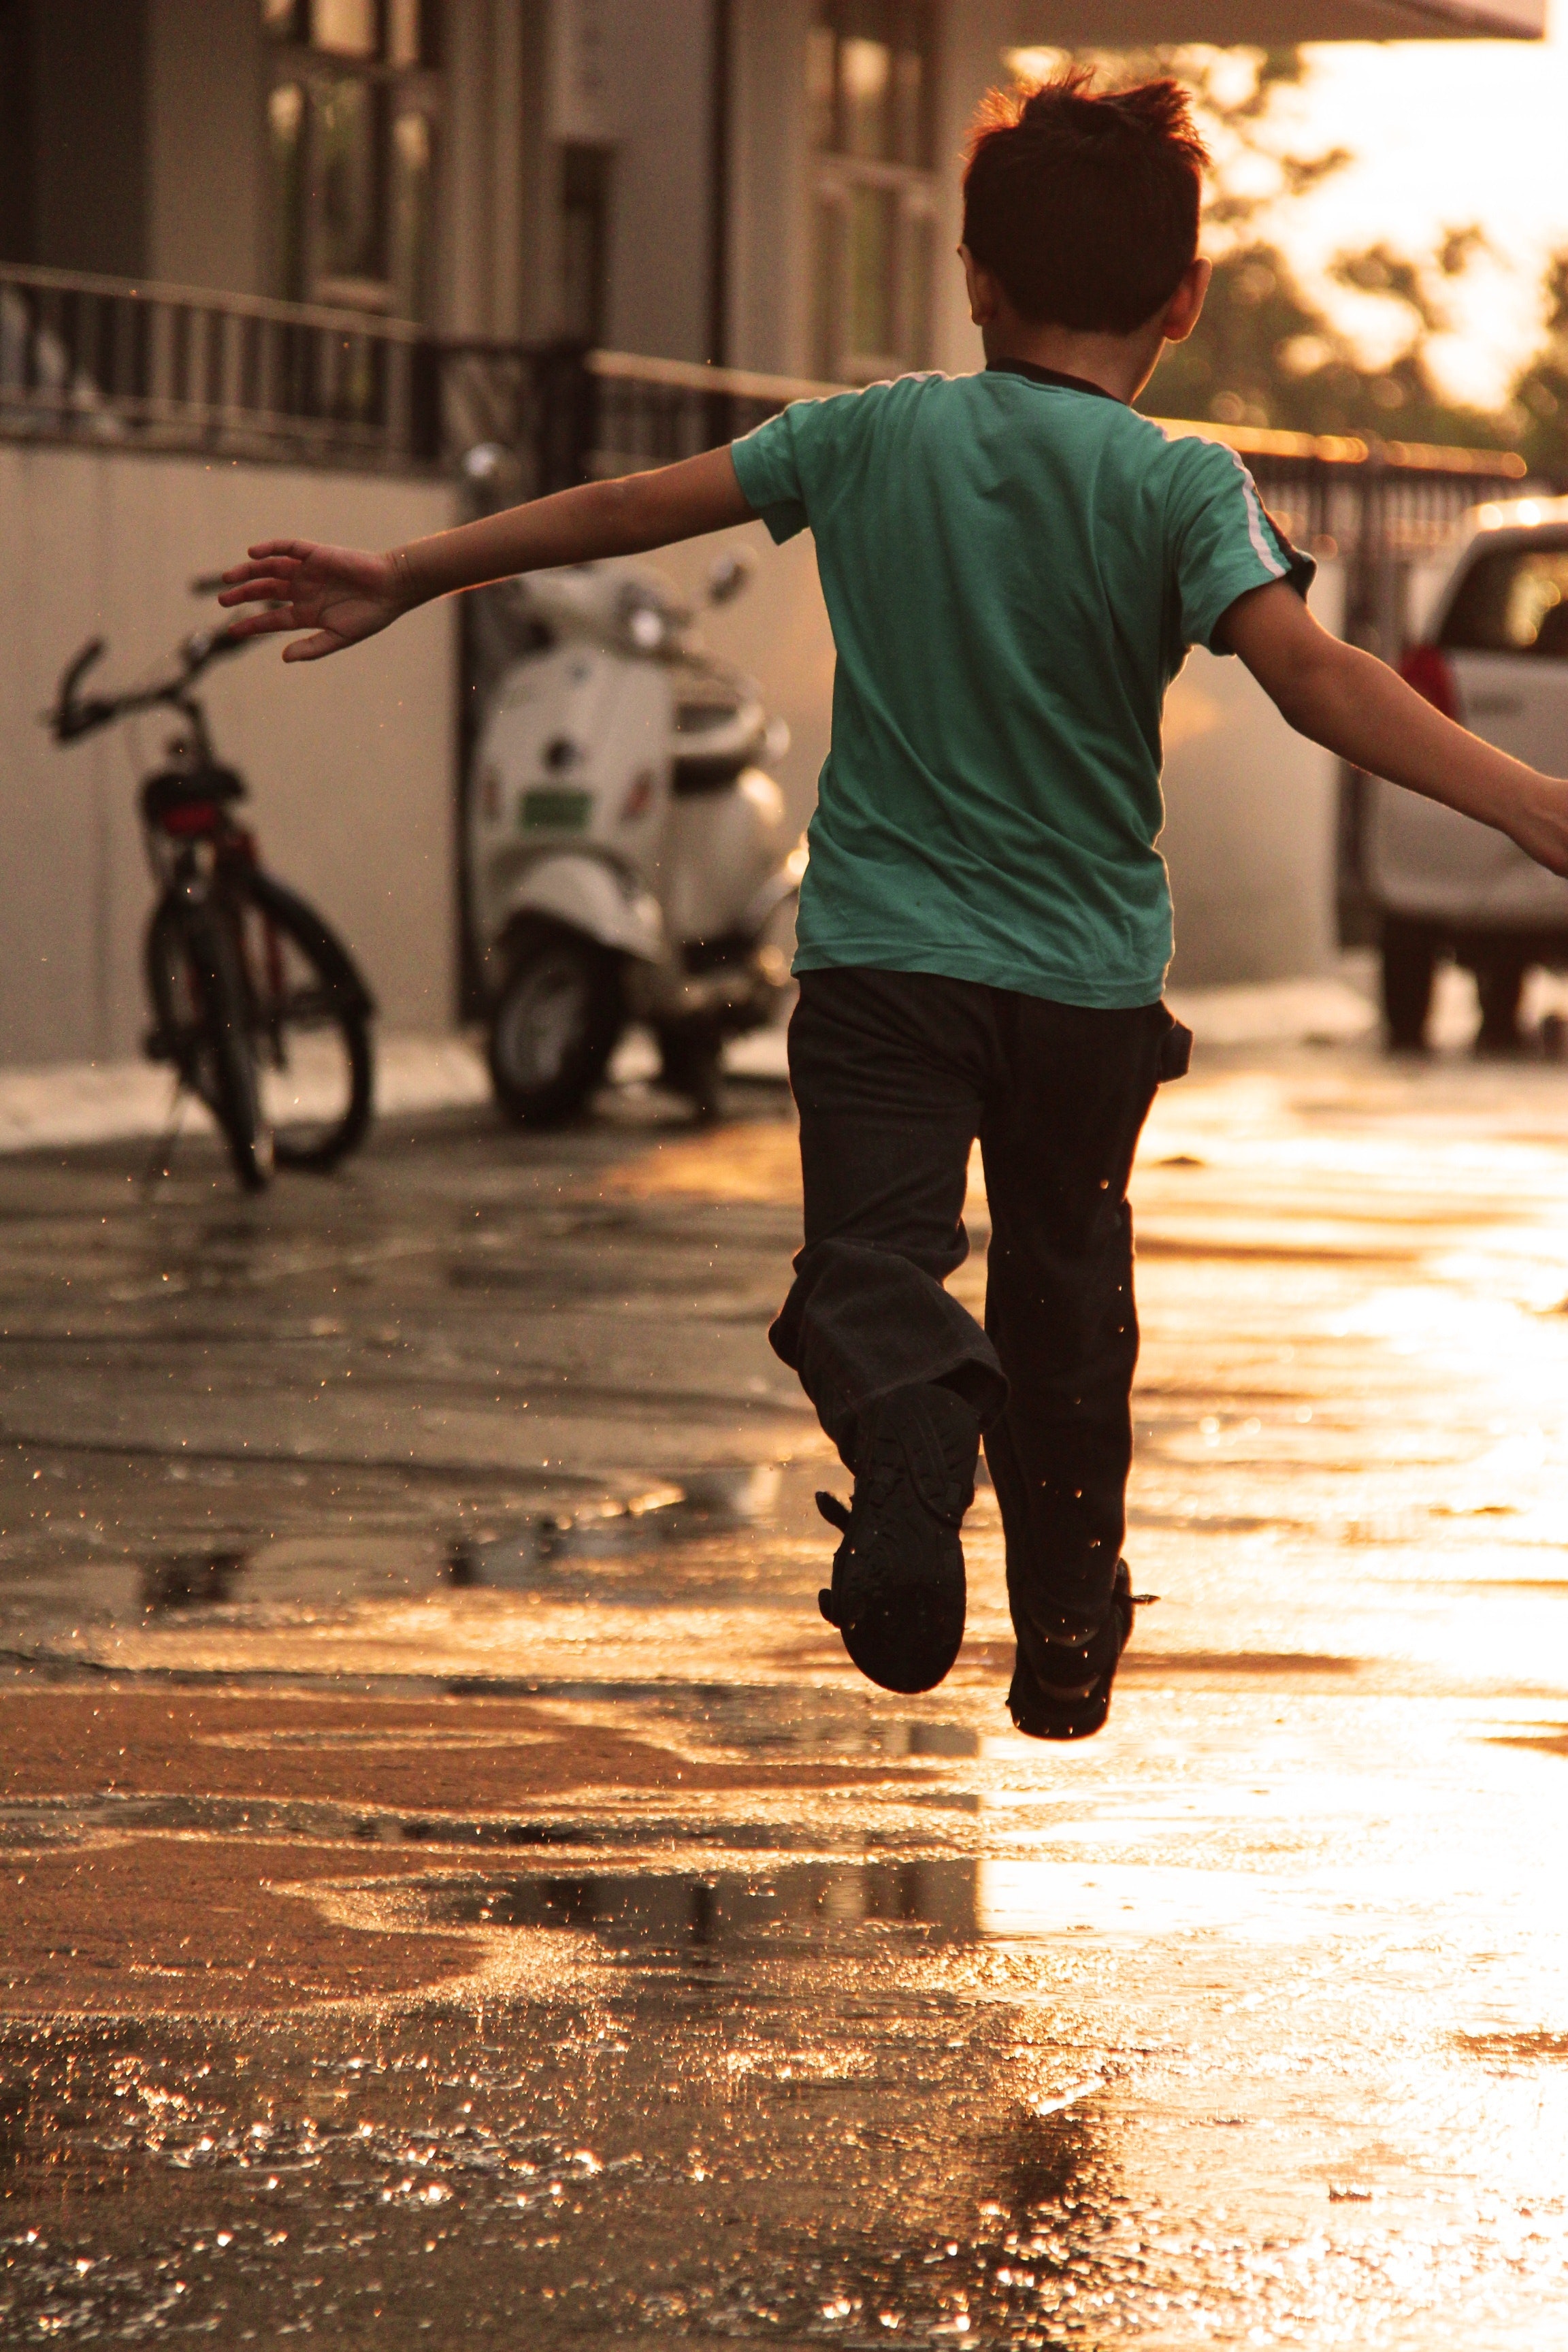 Boy in green t shirt running on wet road during daytime photo